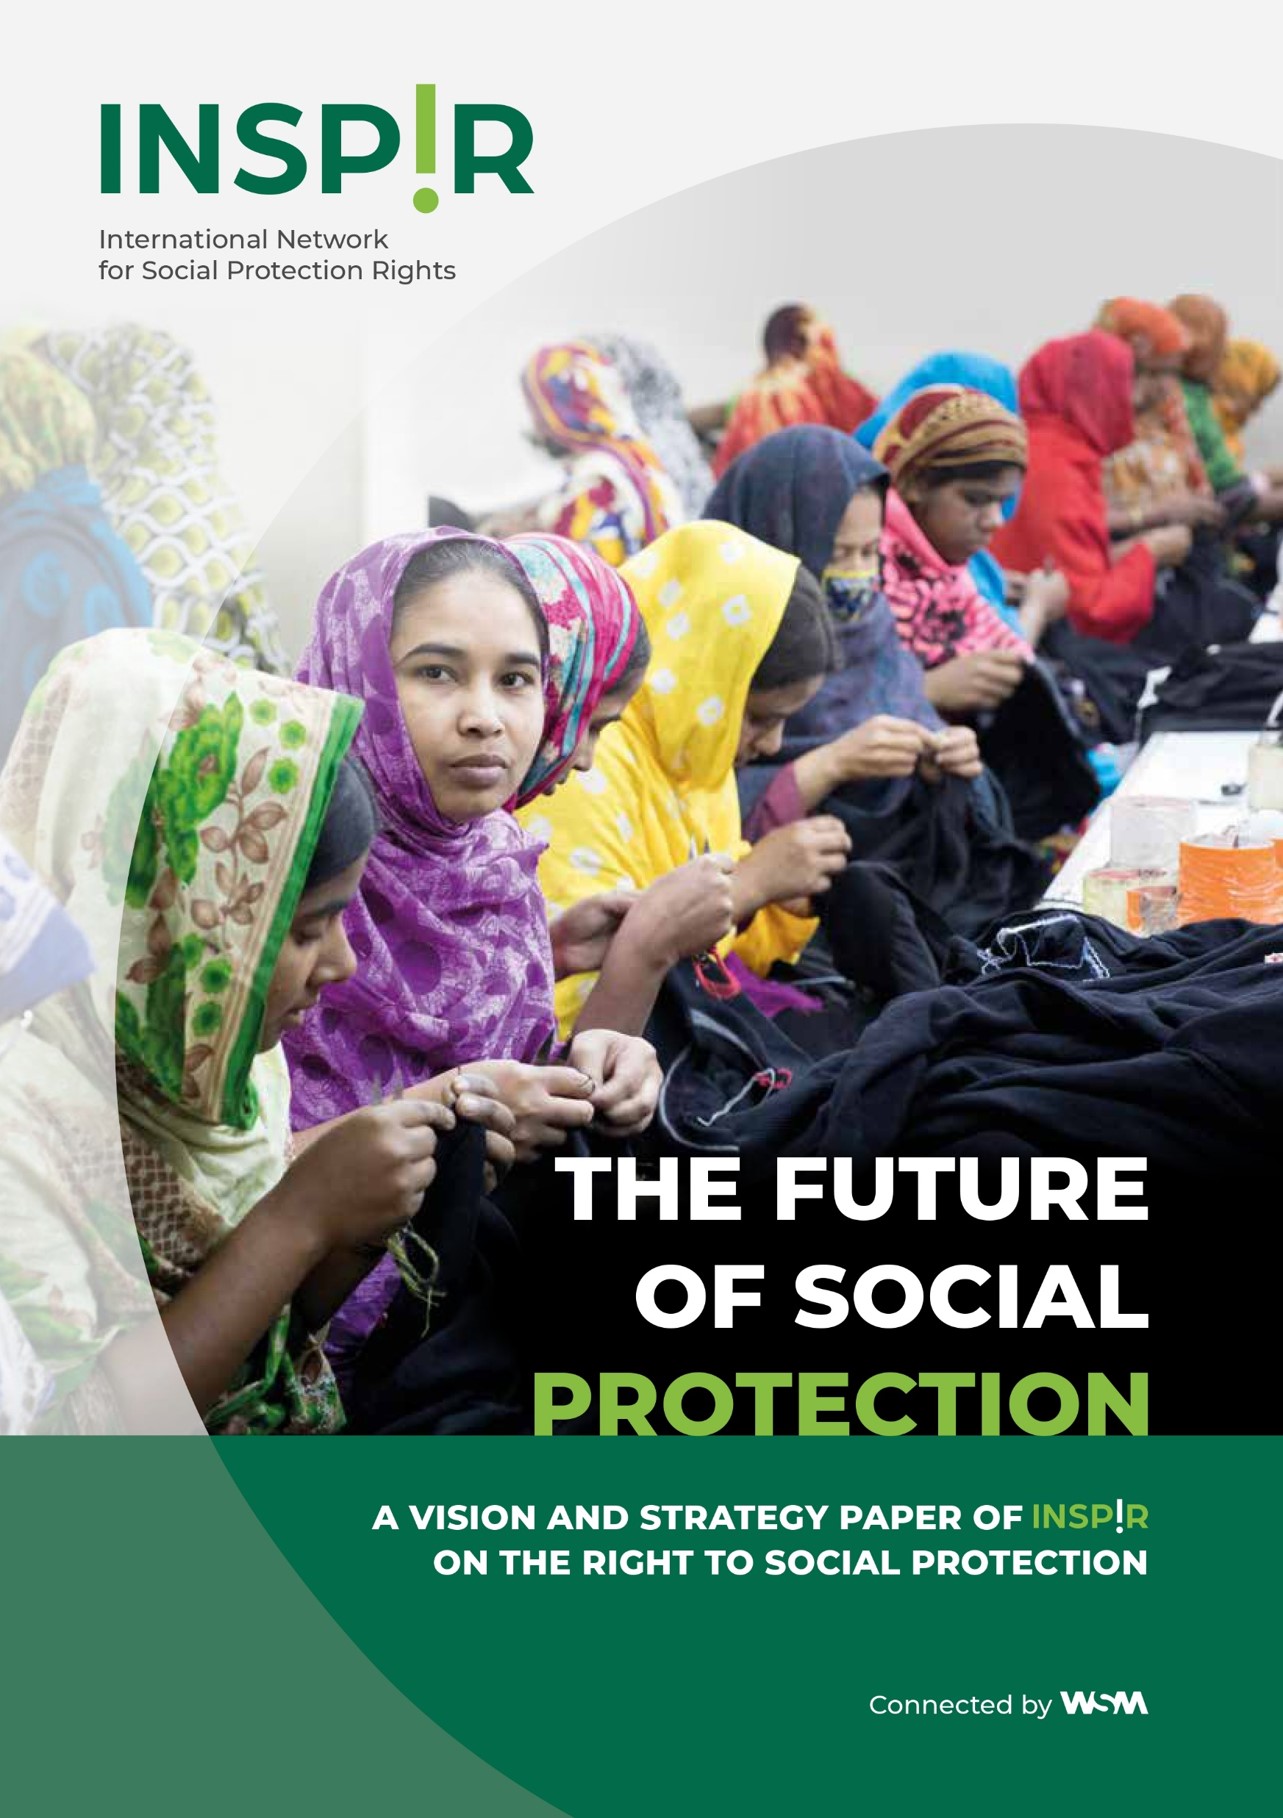 Brochure about universal social protection